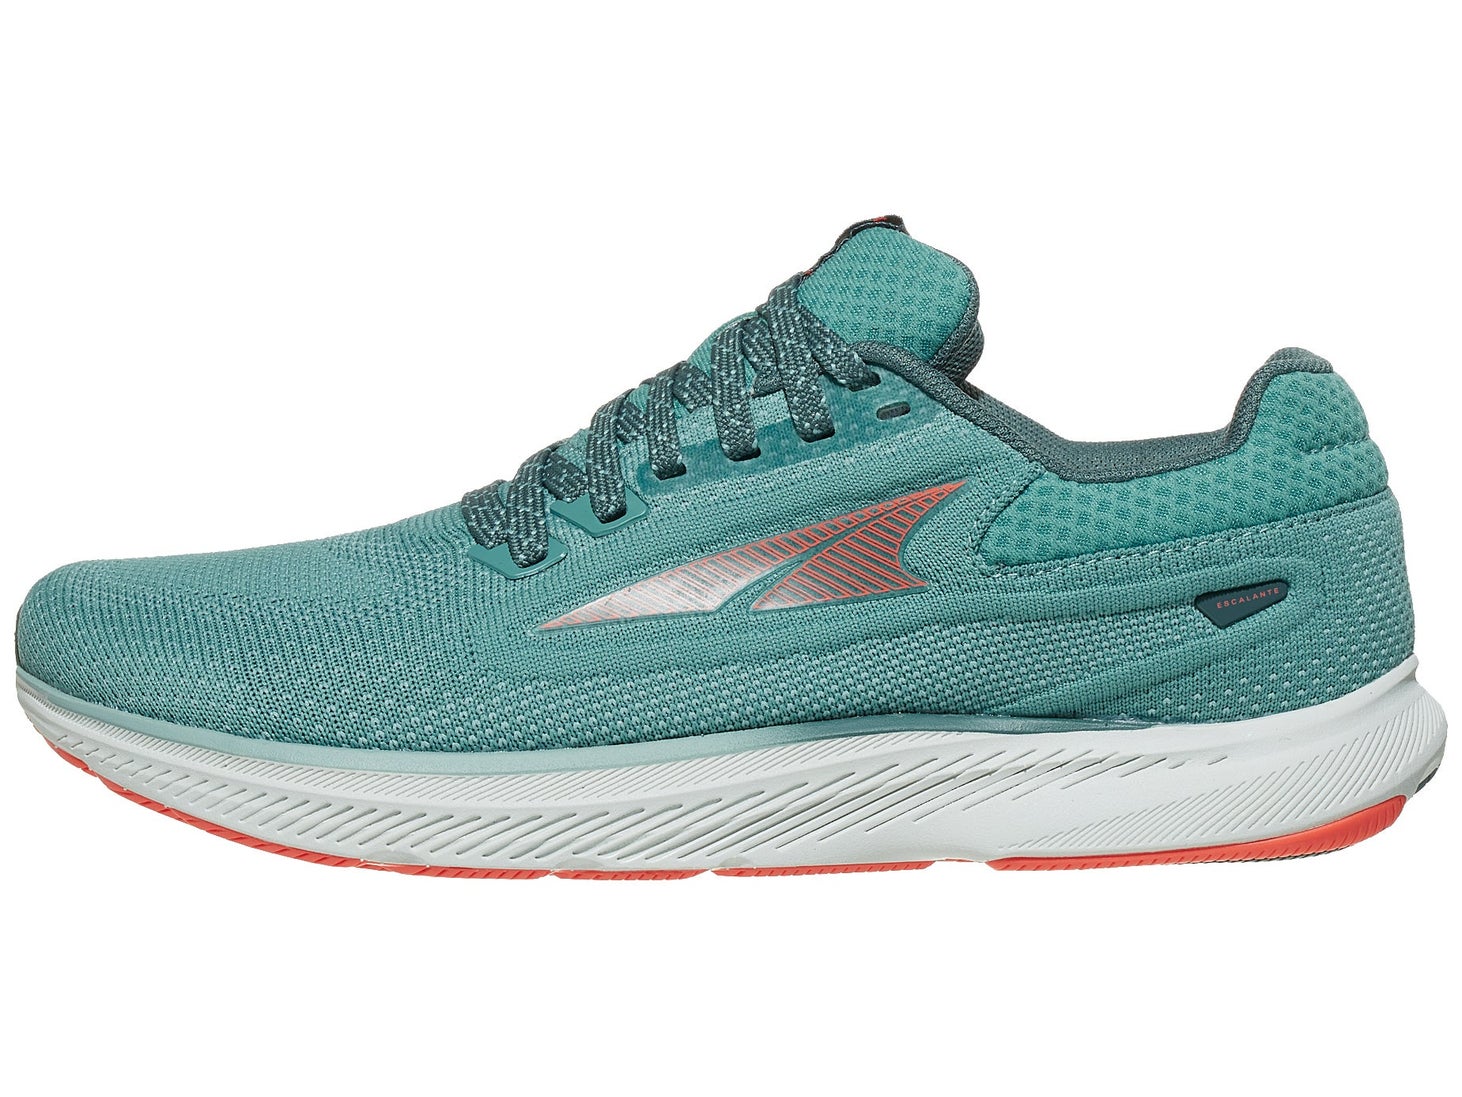 Altra Escalante 3 Women's Shoes Dusty Teal | Running Warehouse